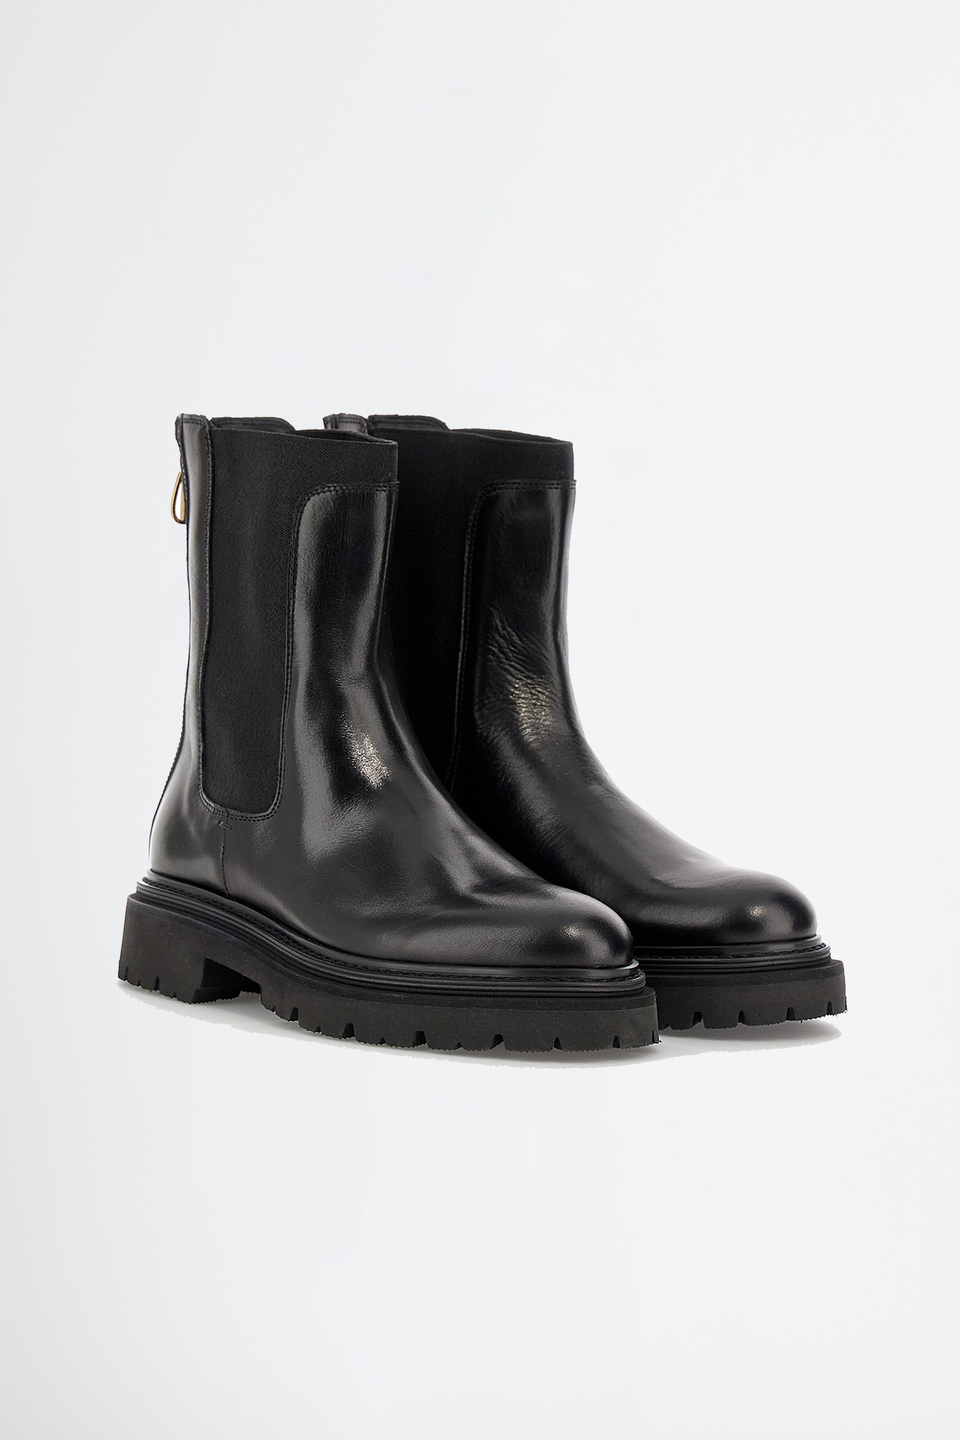 High city boot in leather | La Martina - Official Online Shop